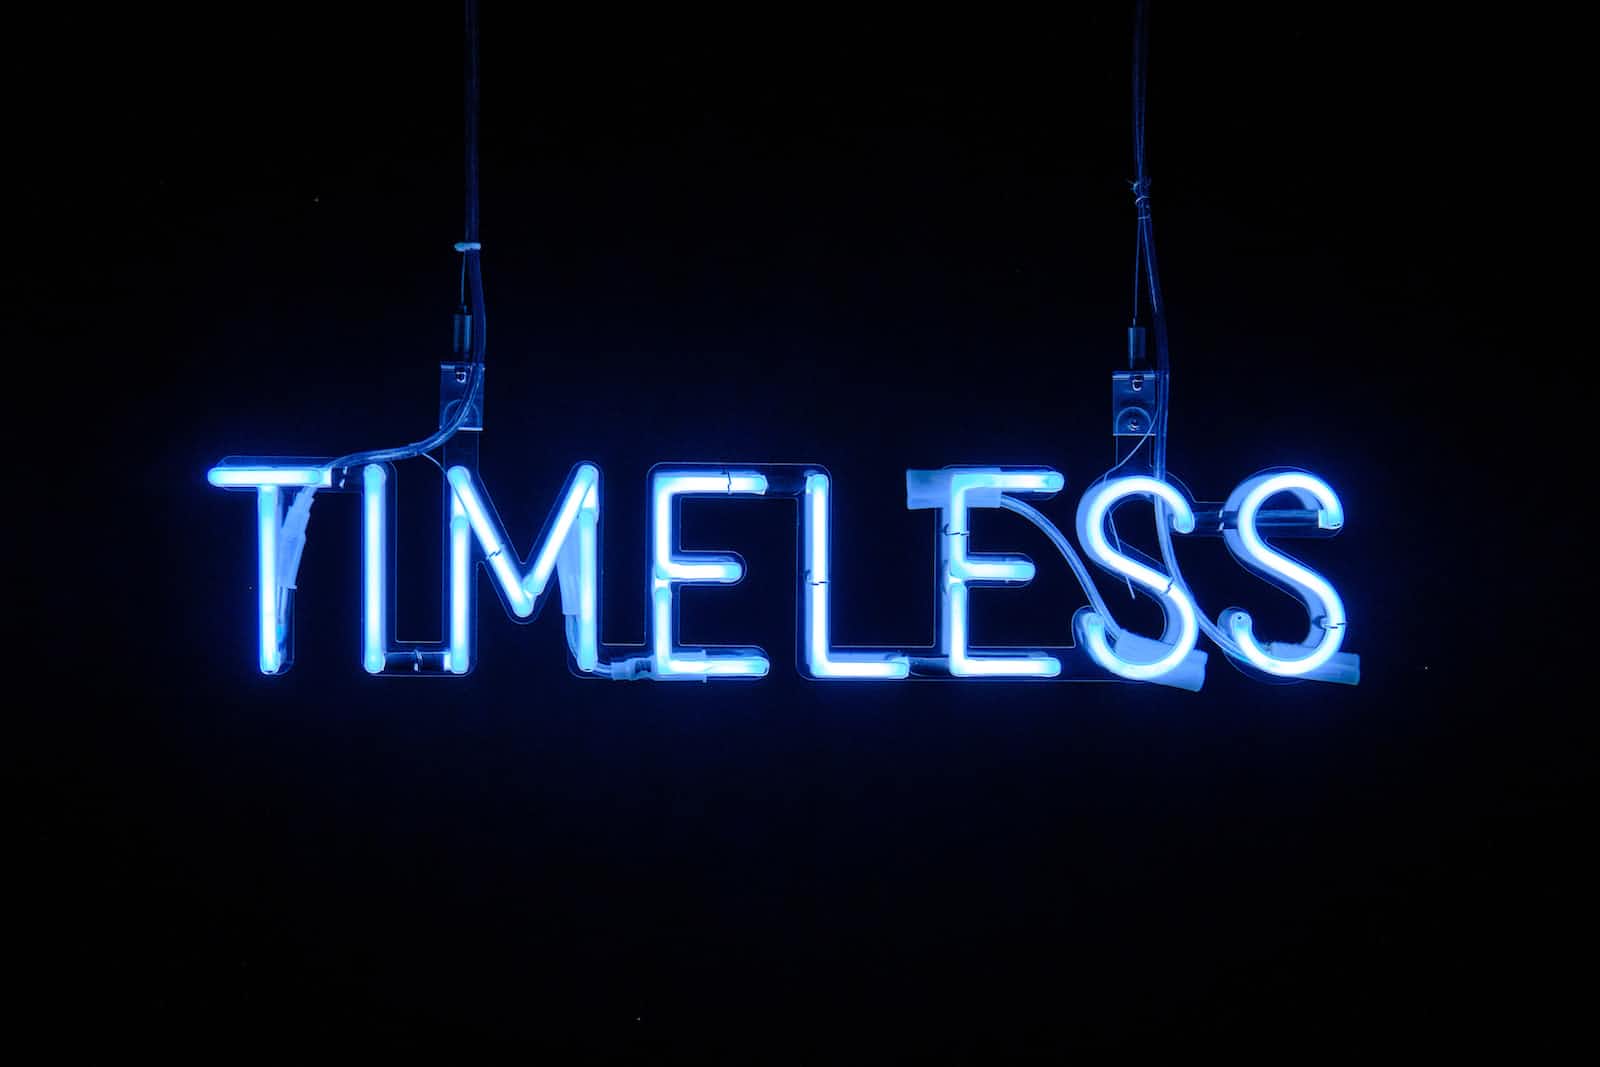 The word timeless in blue neon lights